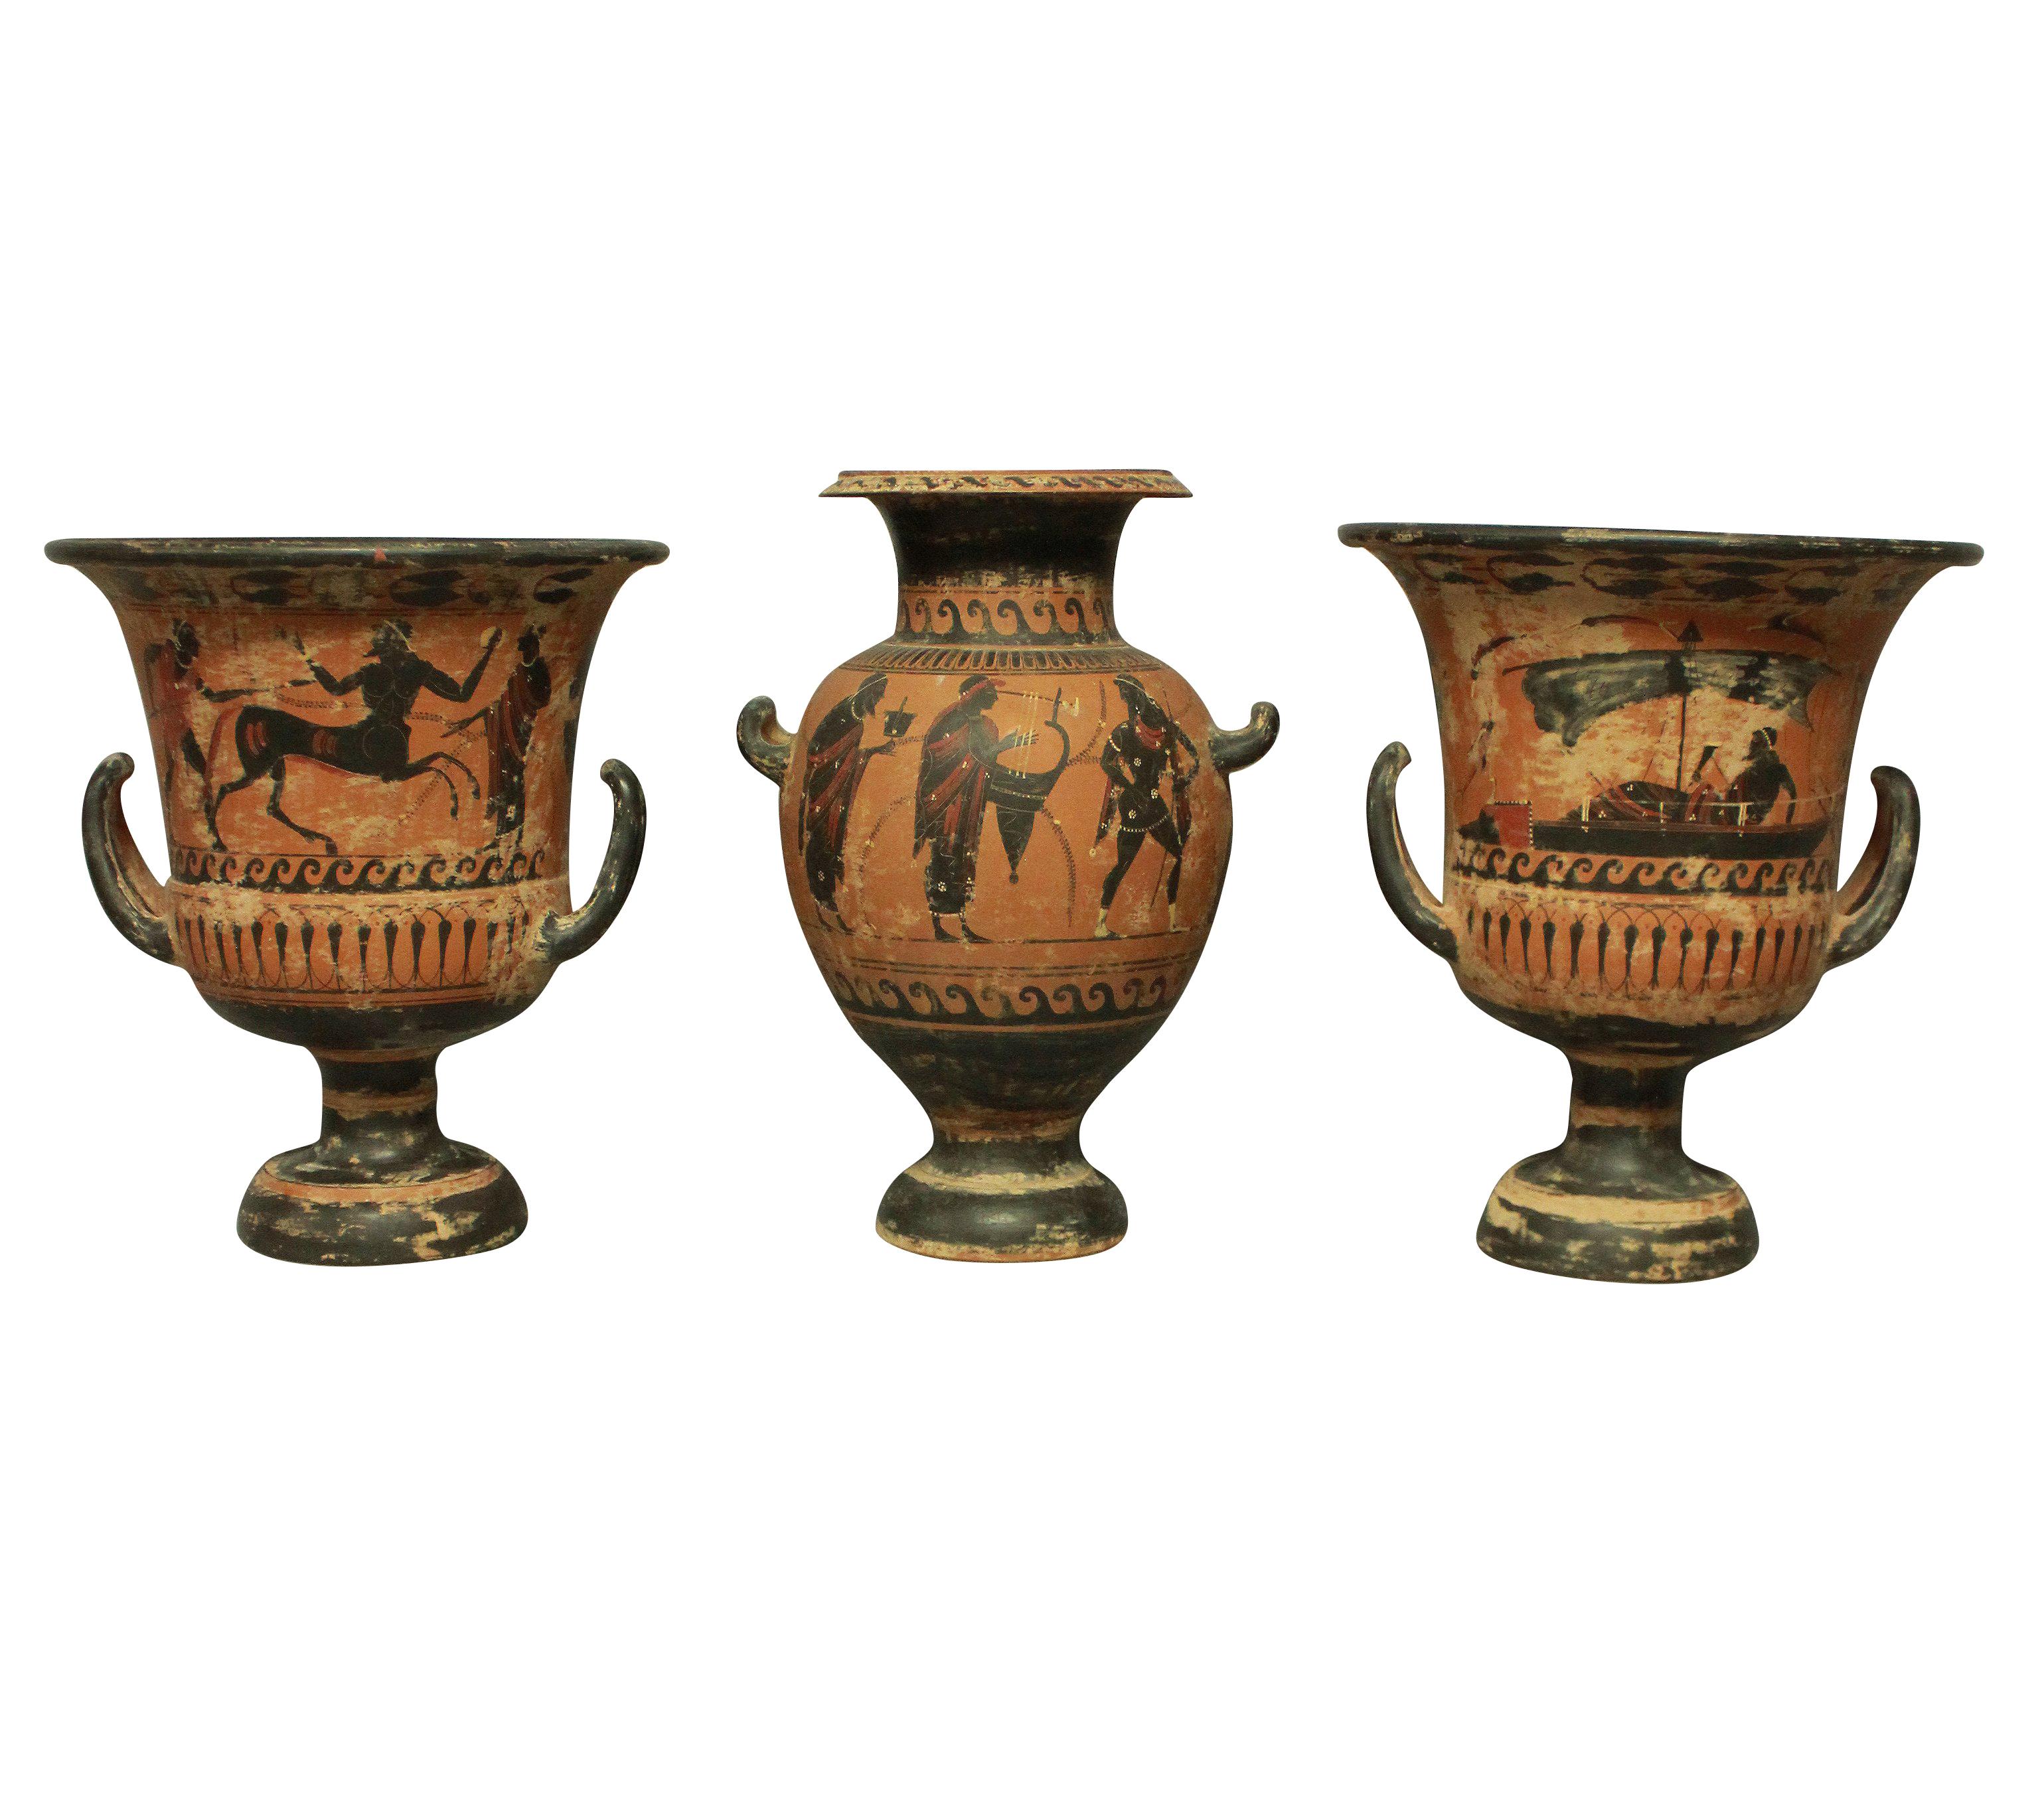 An important collection of large Greek Attic ware Krater vases of various shapes and styles. Depicting a variety of mythical scenes with warriors, equestrian battles, sea battles, satyrs and young men.